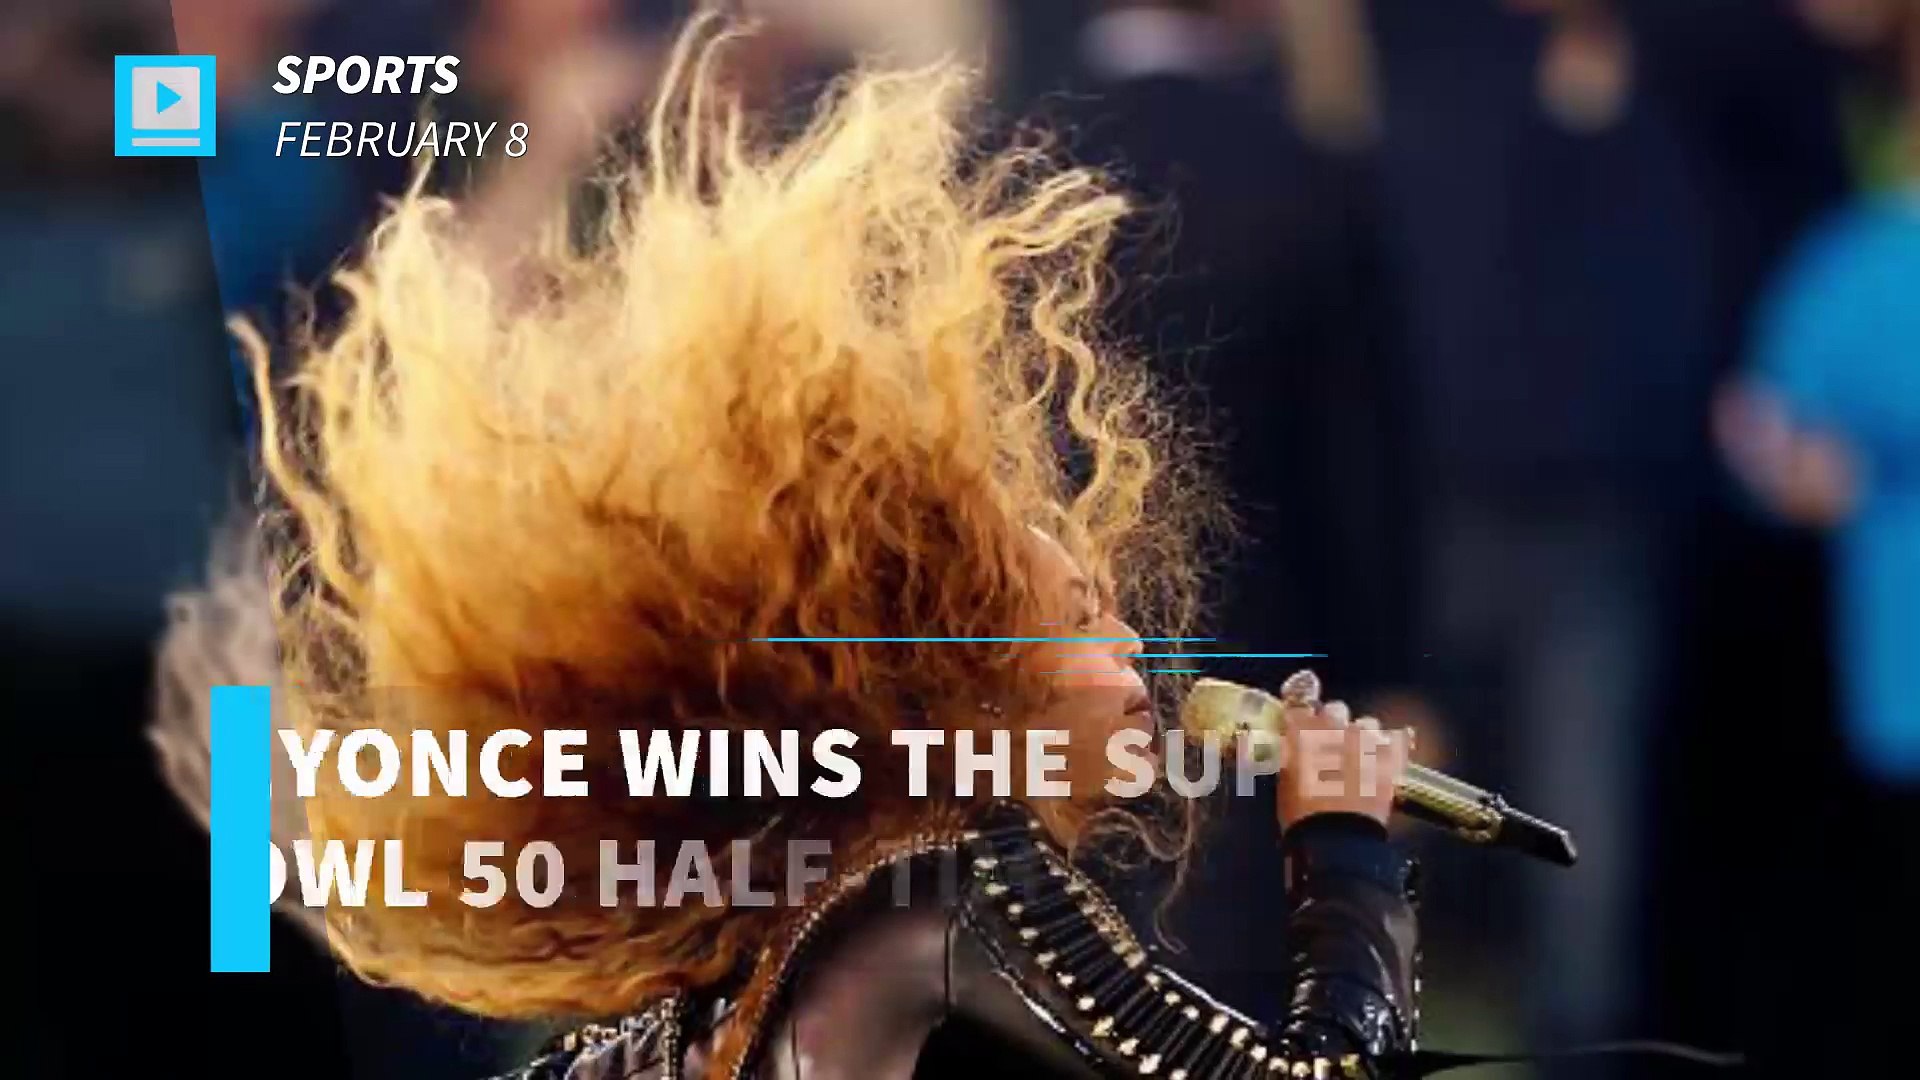 Beyonce wins the Super Bowl 50 half-time show with Coldplay and Bruno Mars